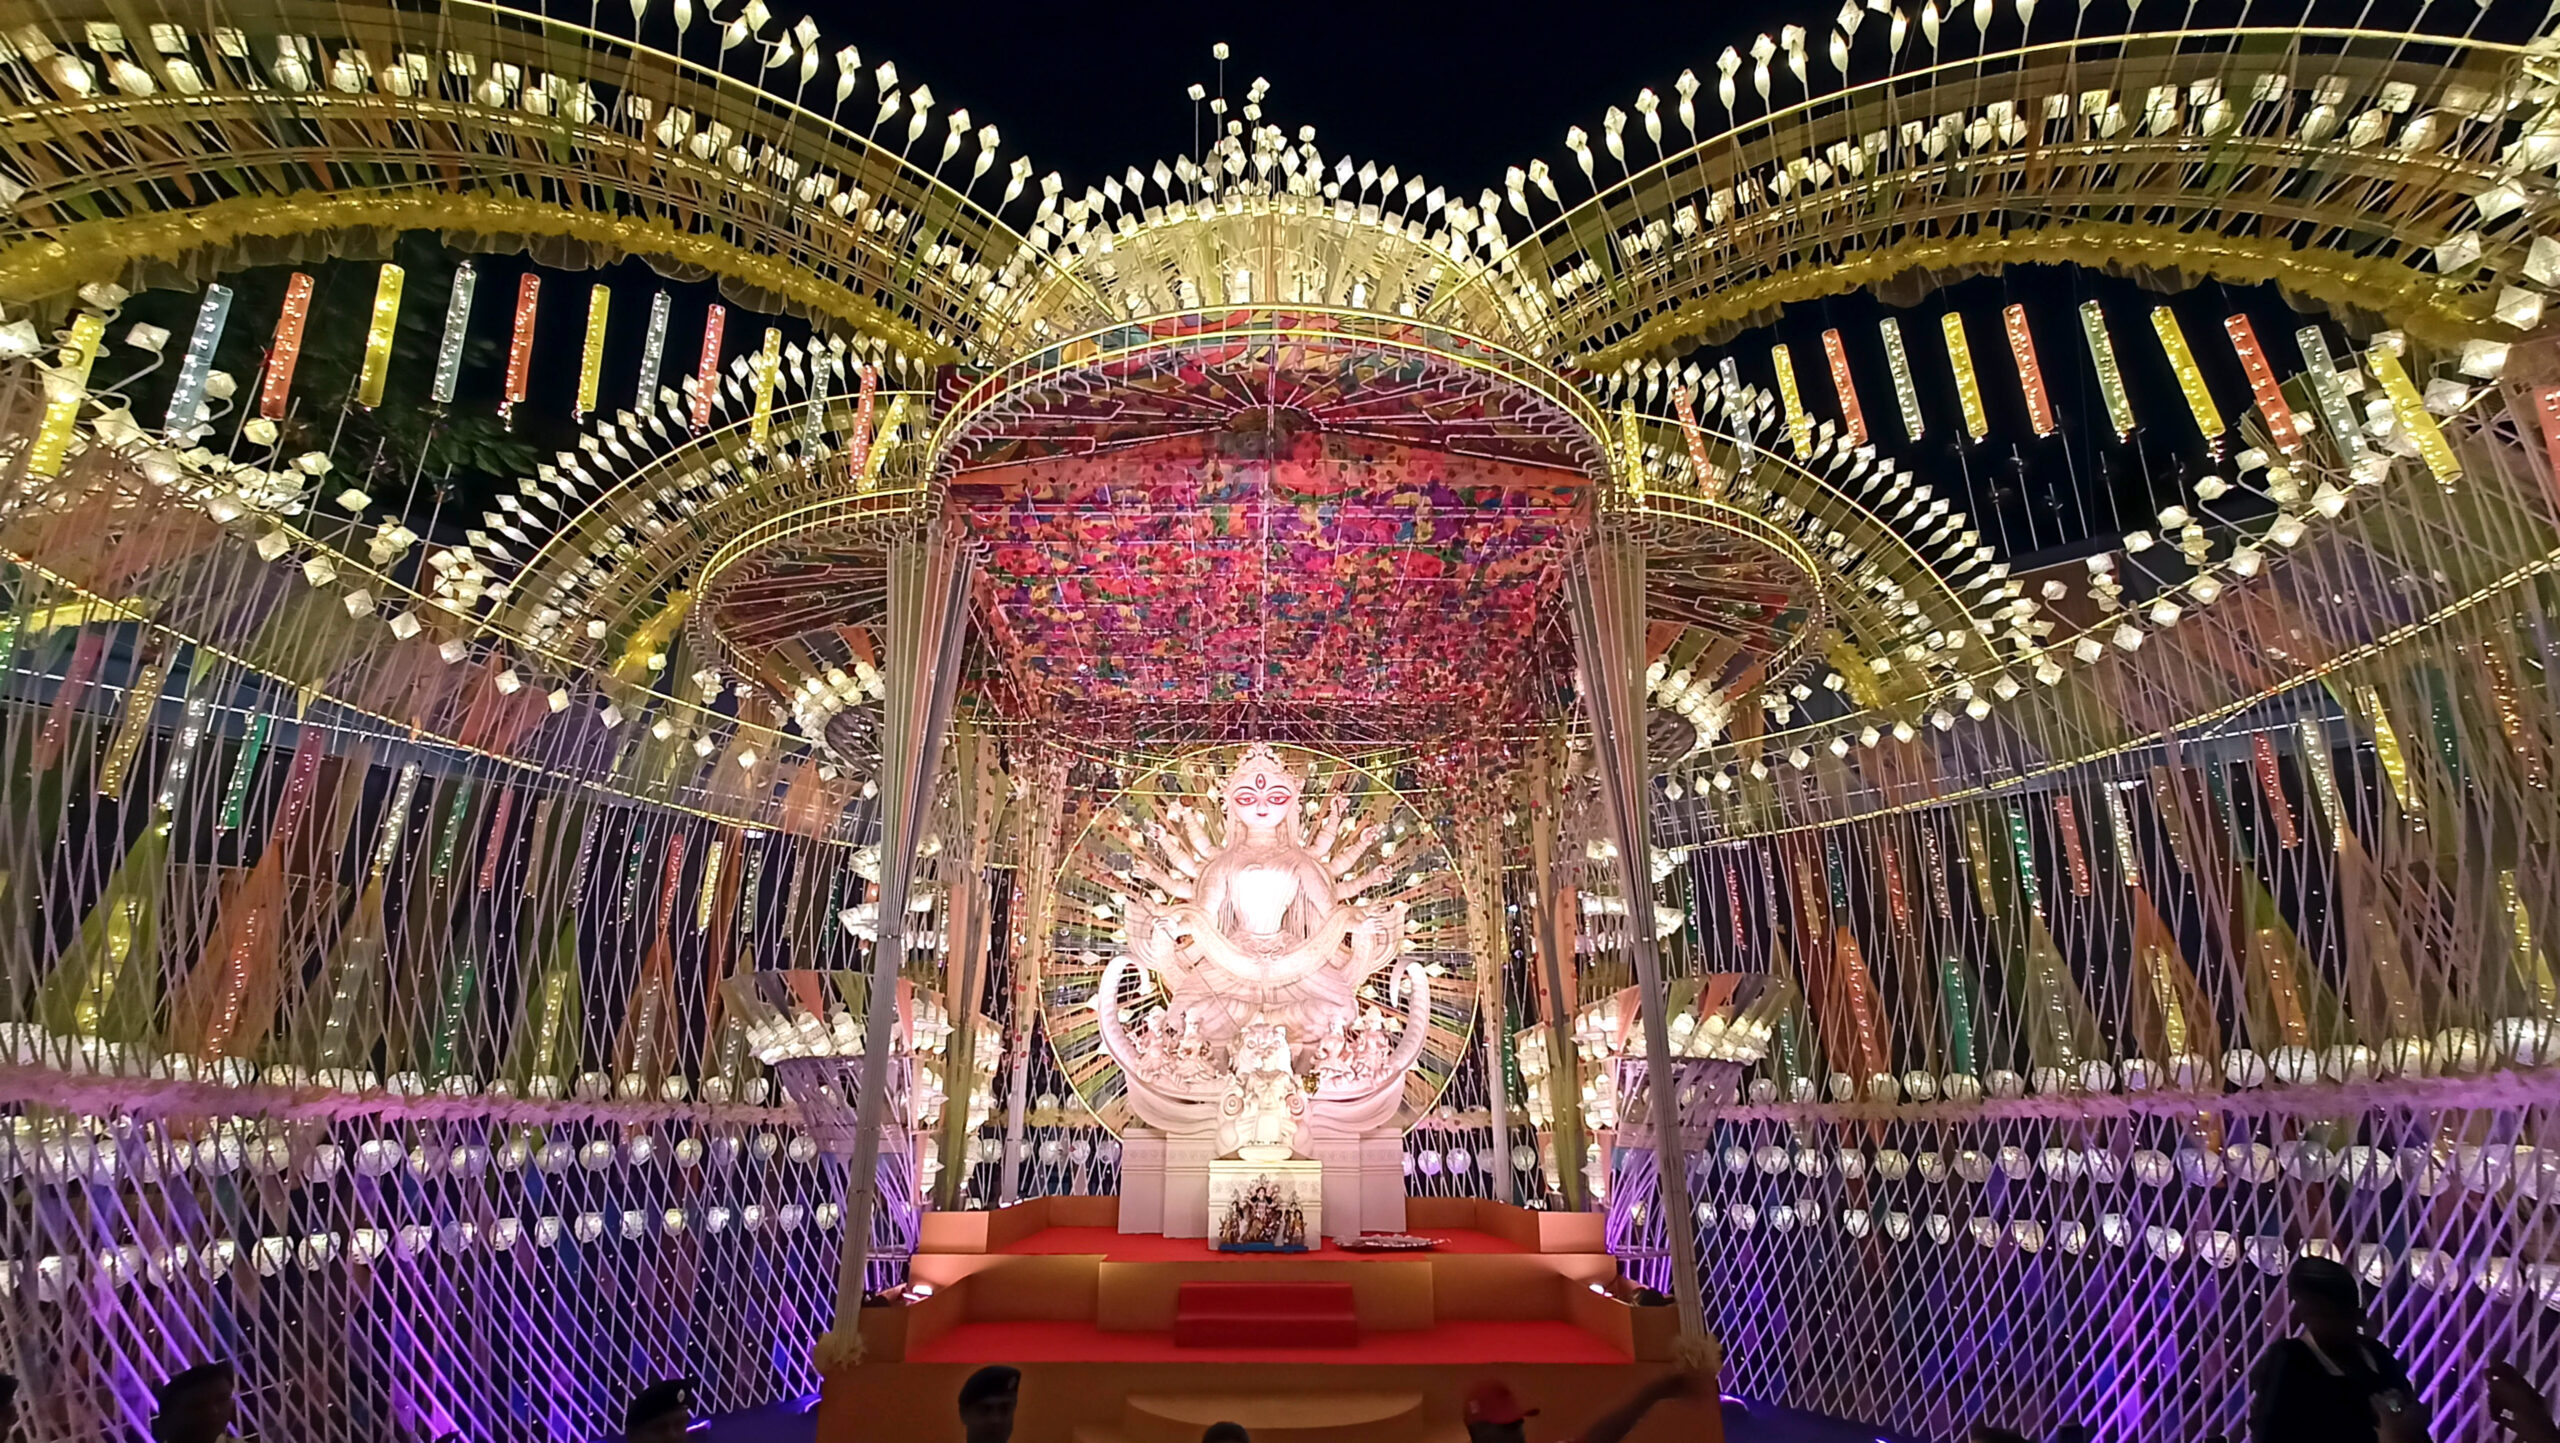 An idol of Goddess Durga is installed in a community pandal